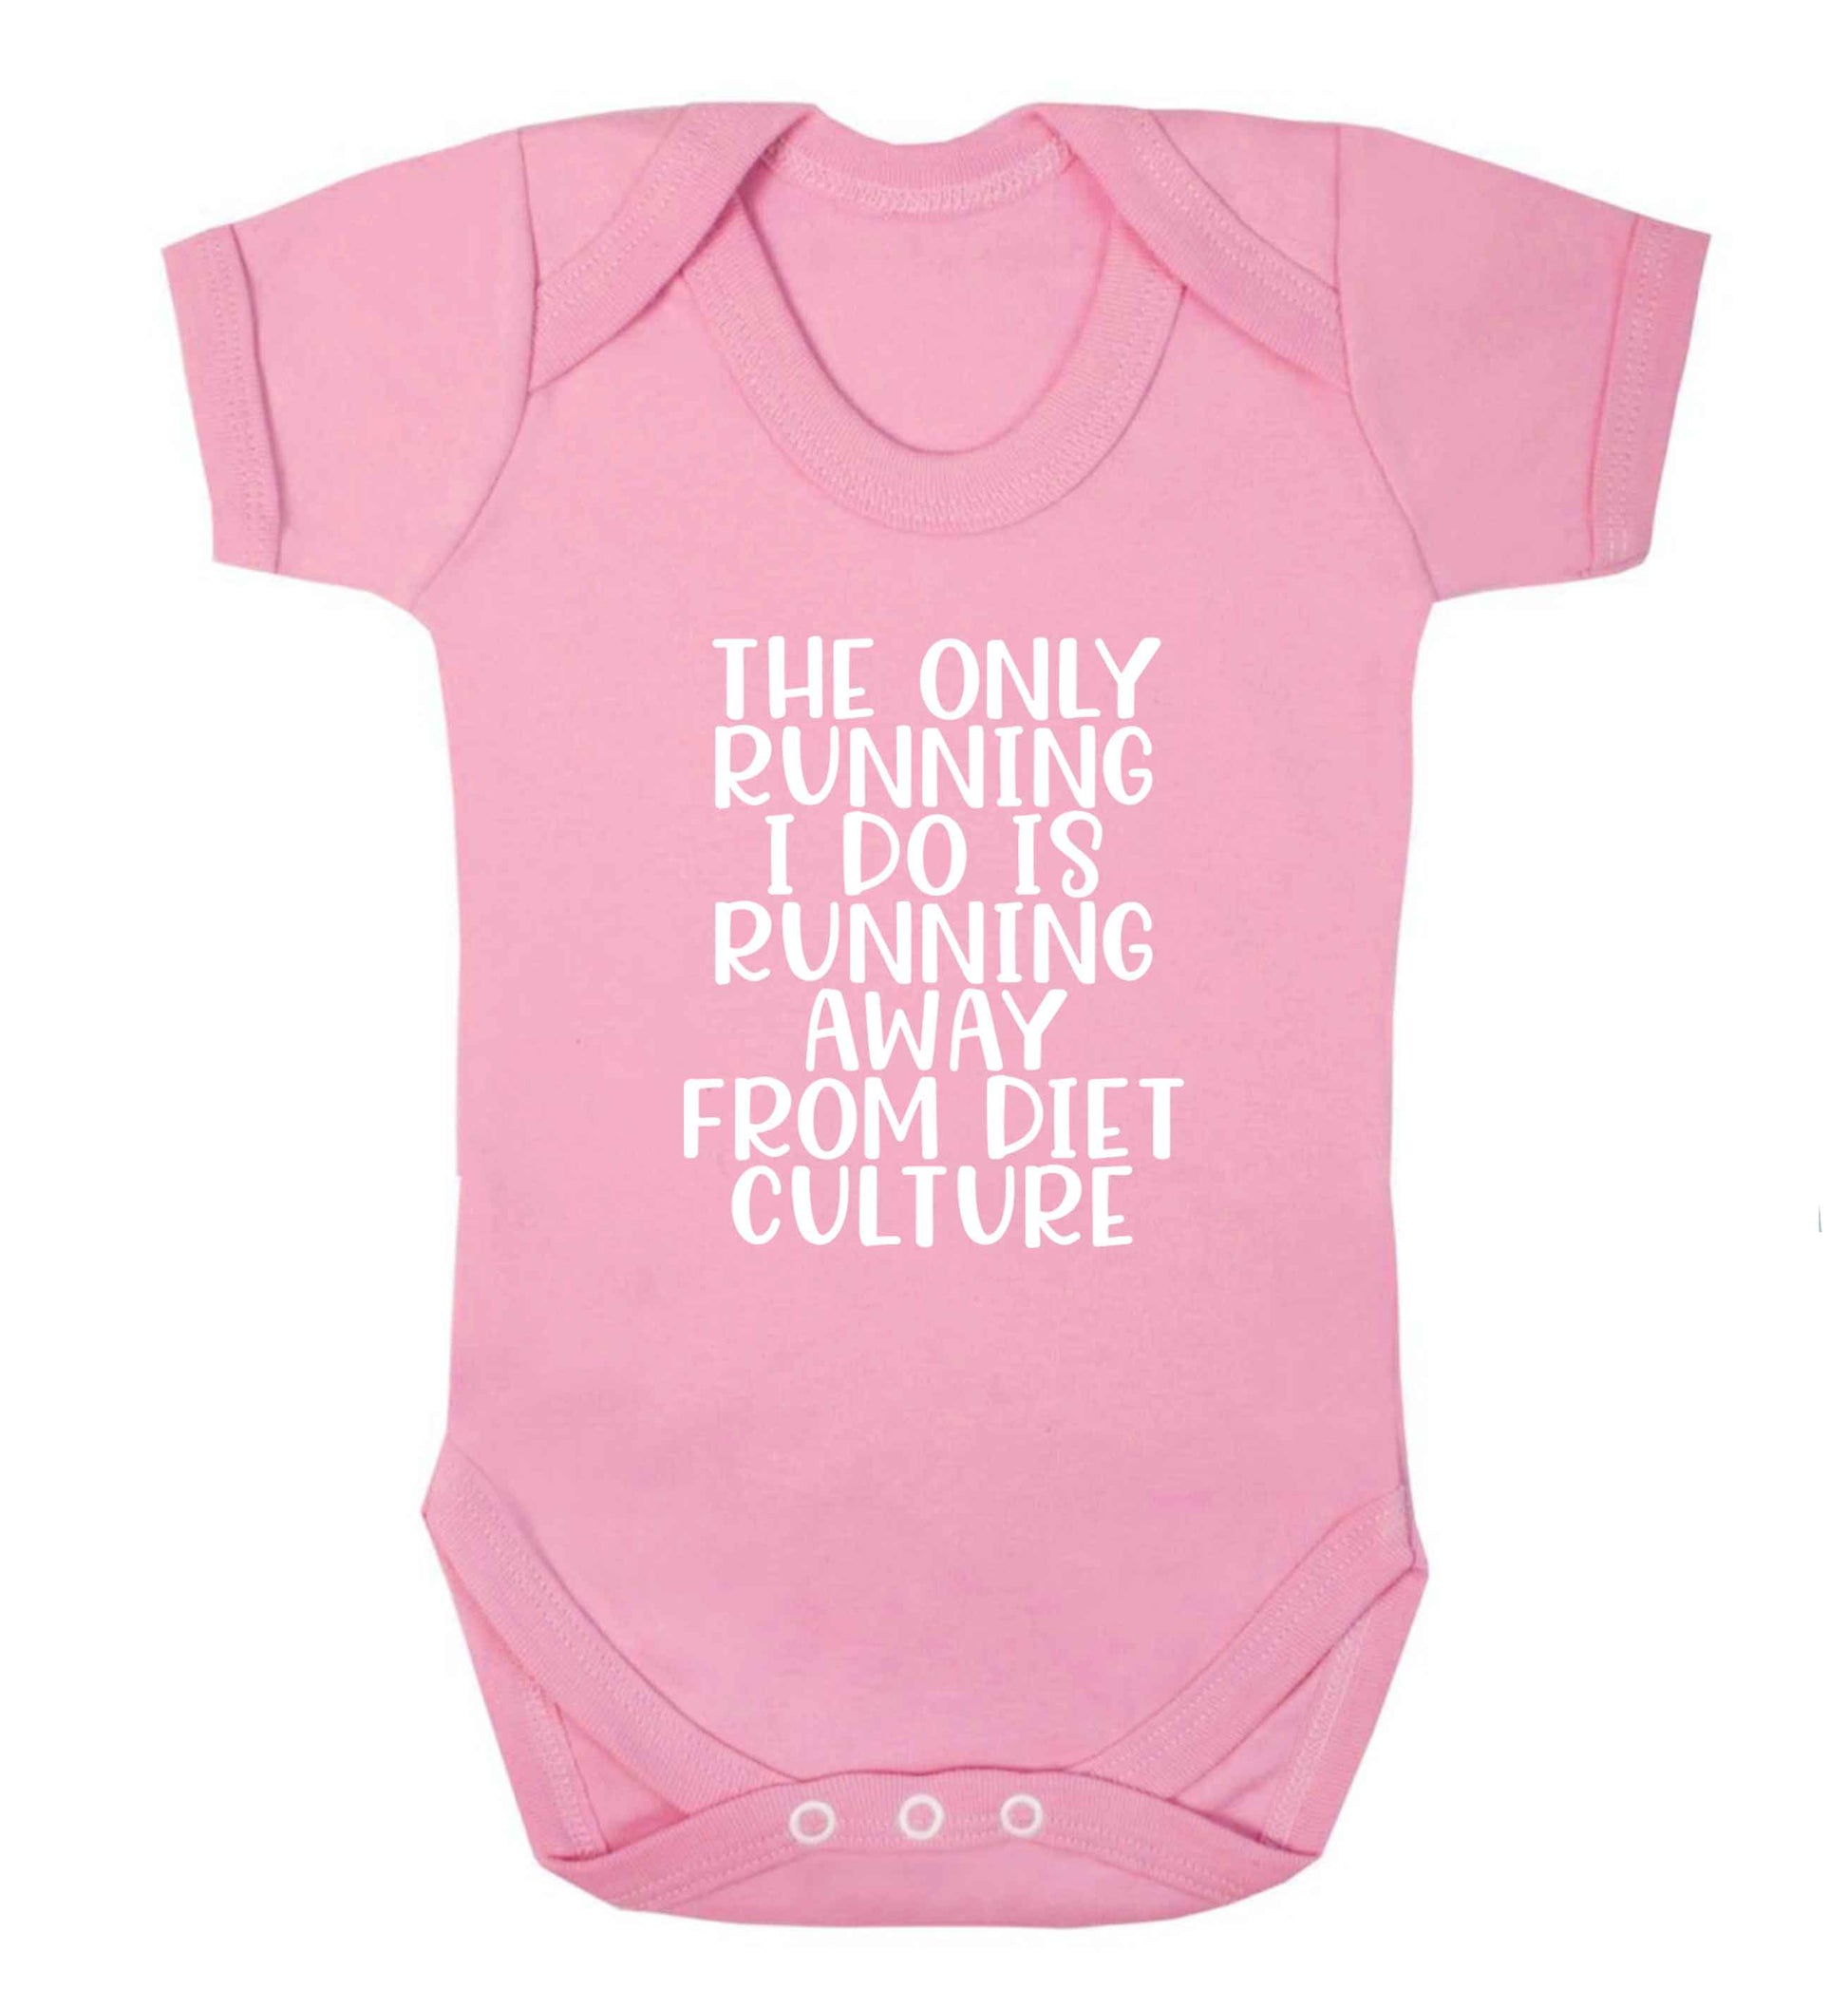 The only running I do is running away from diet culture baby vest pale pink 18-24 months